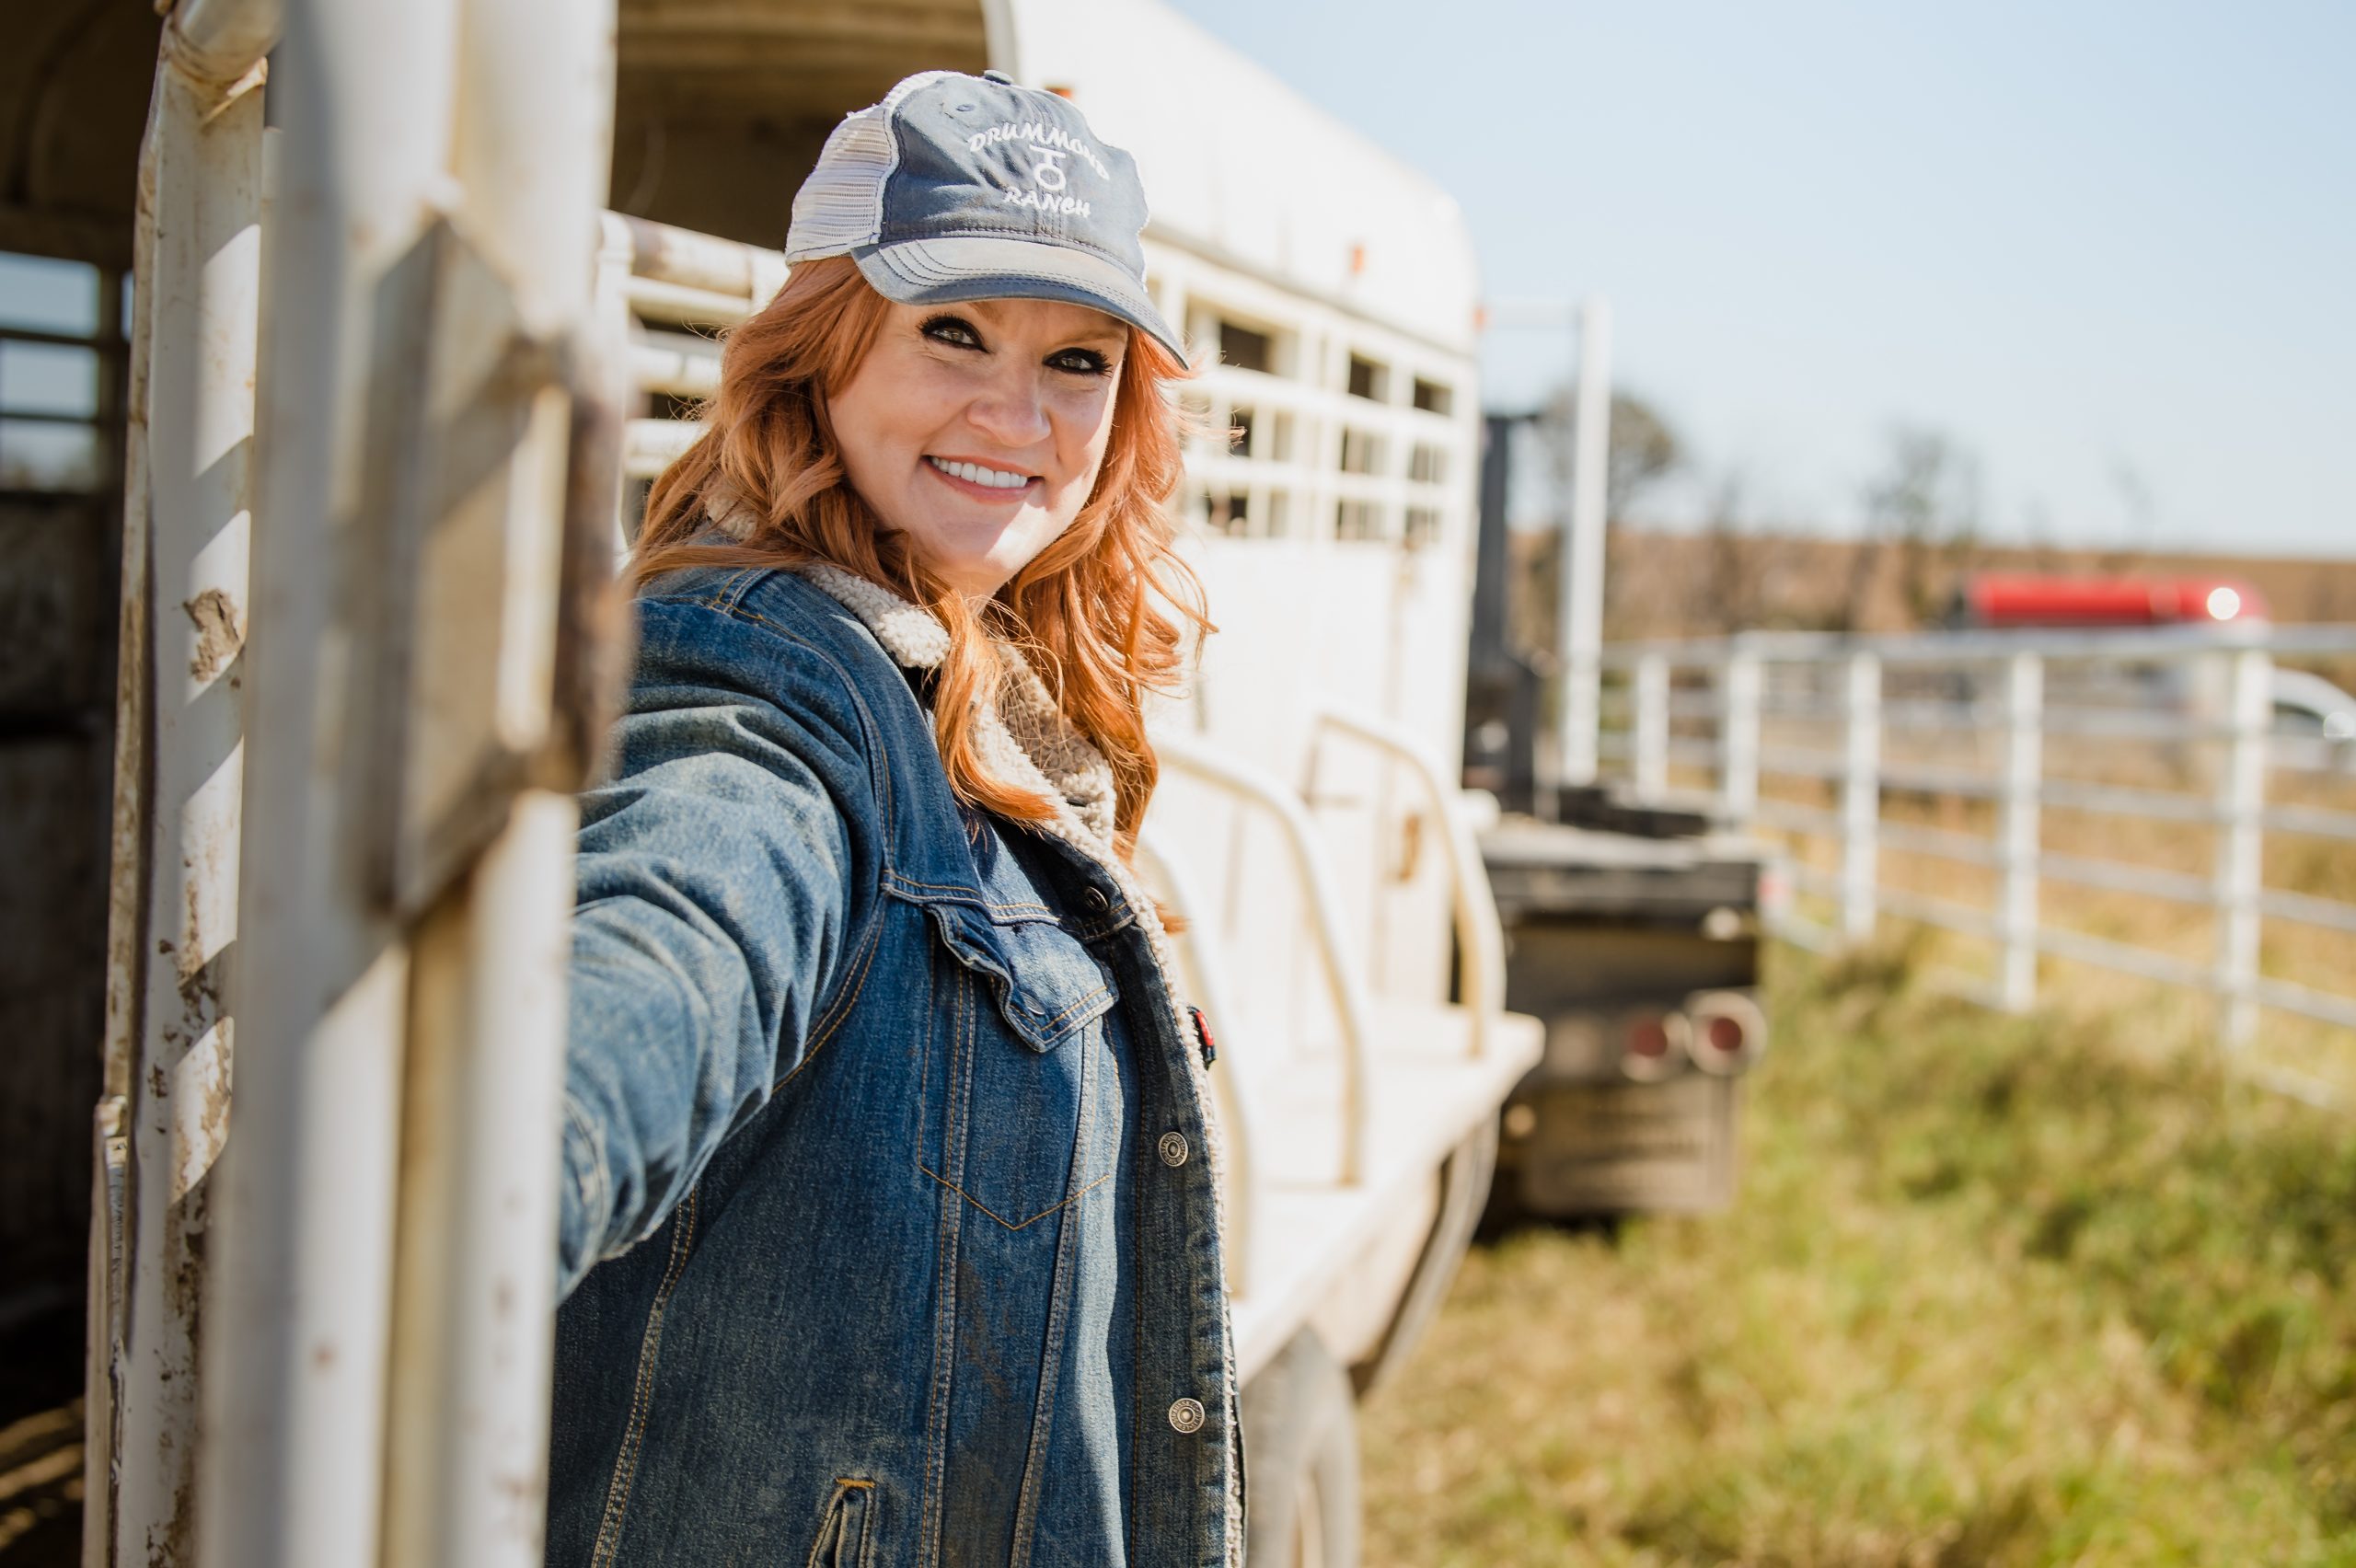 Pioneer Woman' Ree Drummond's new slow are cookers selling out fast